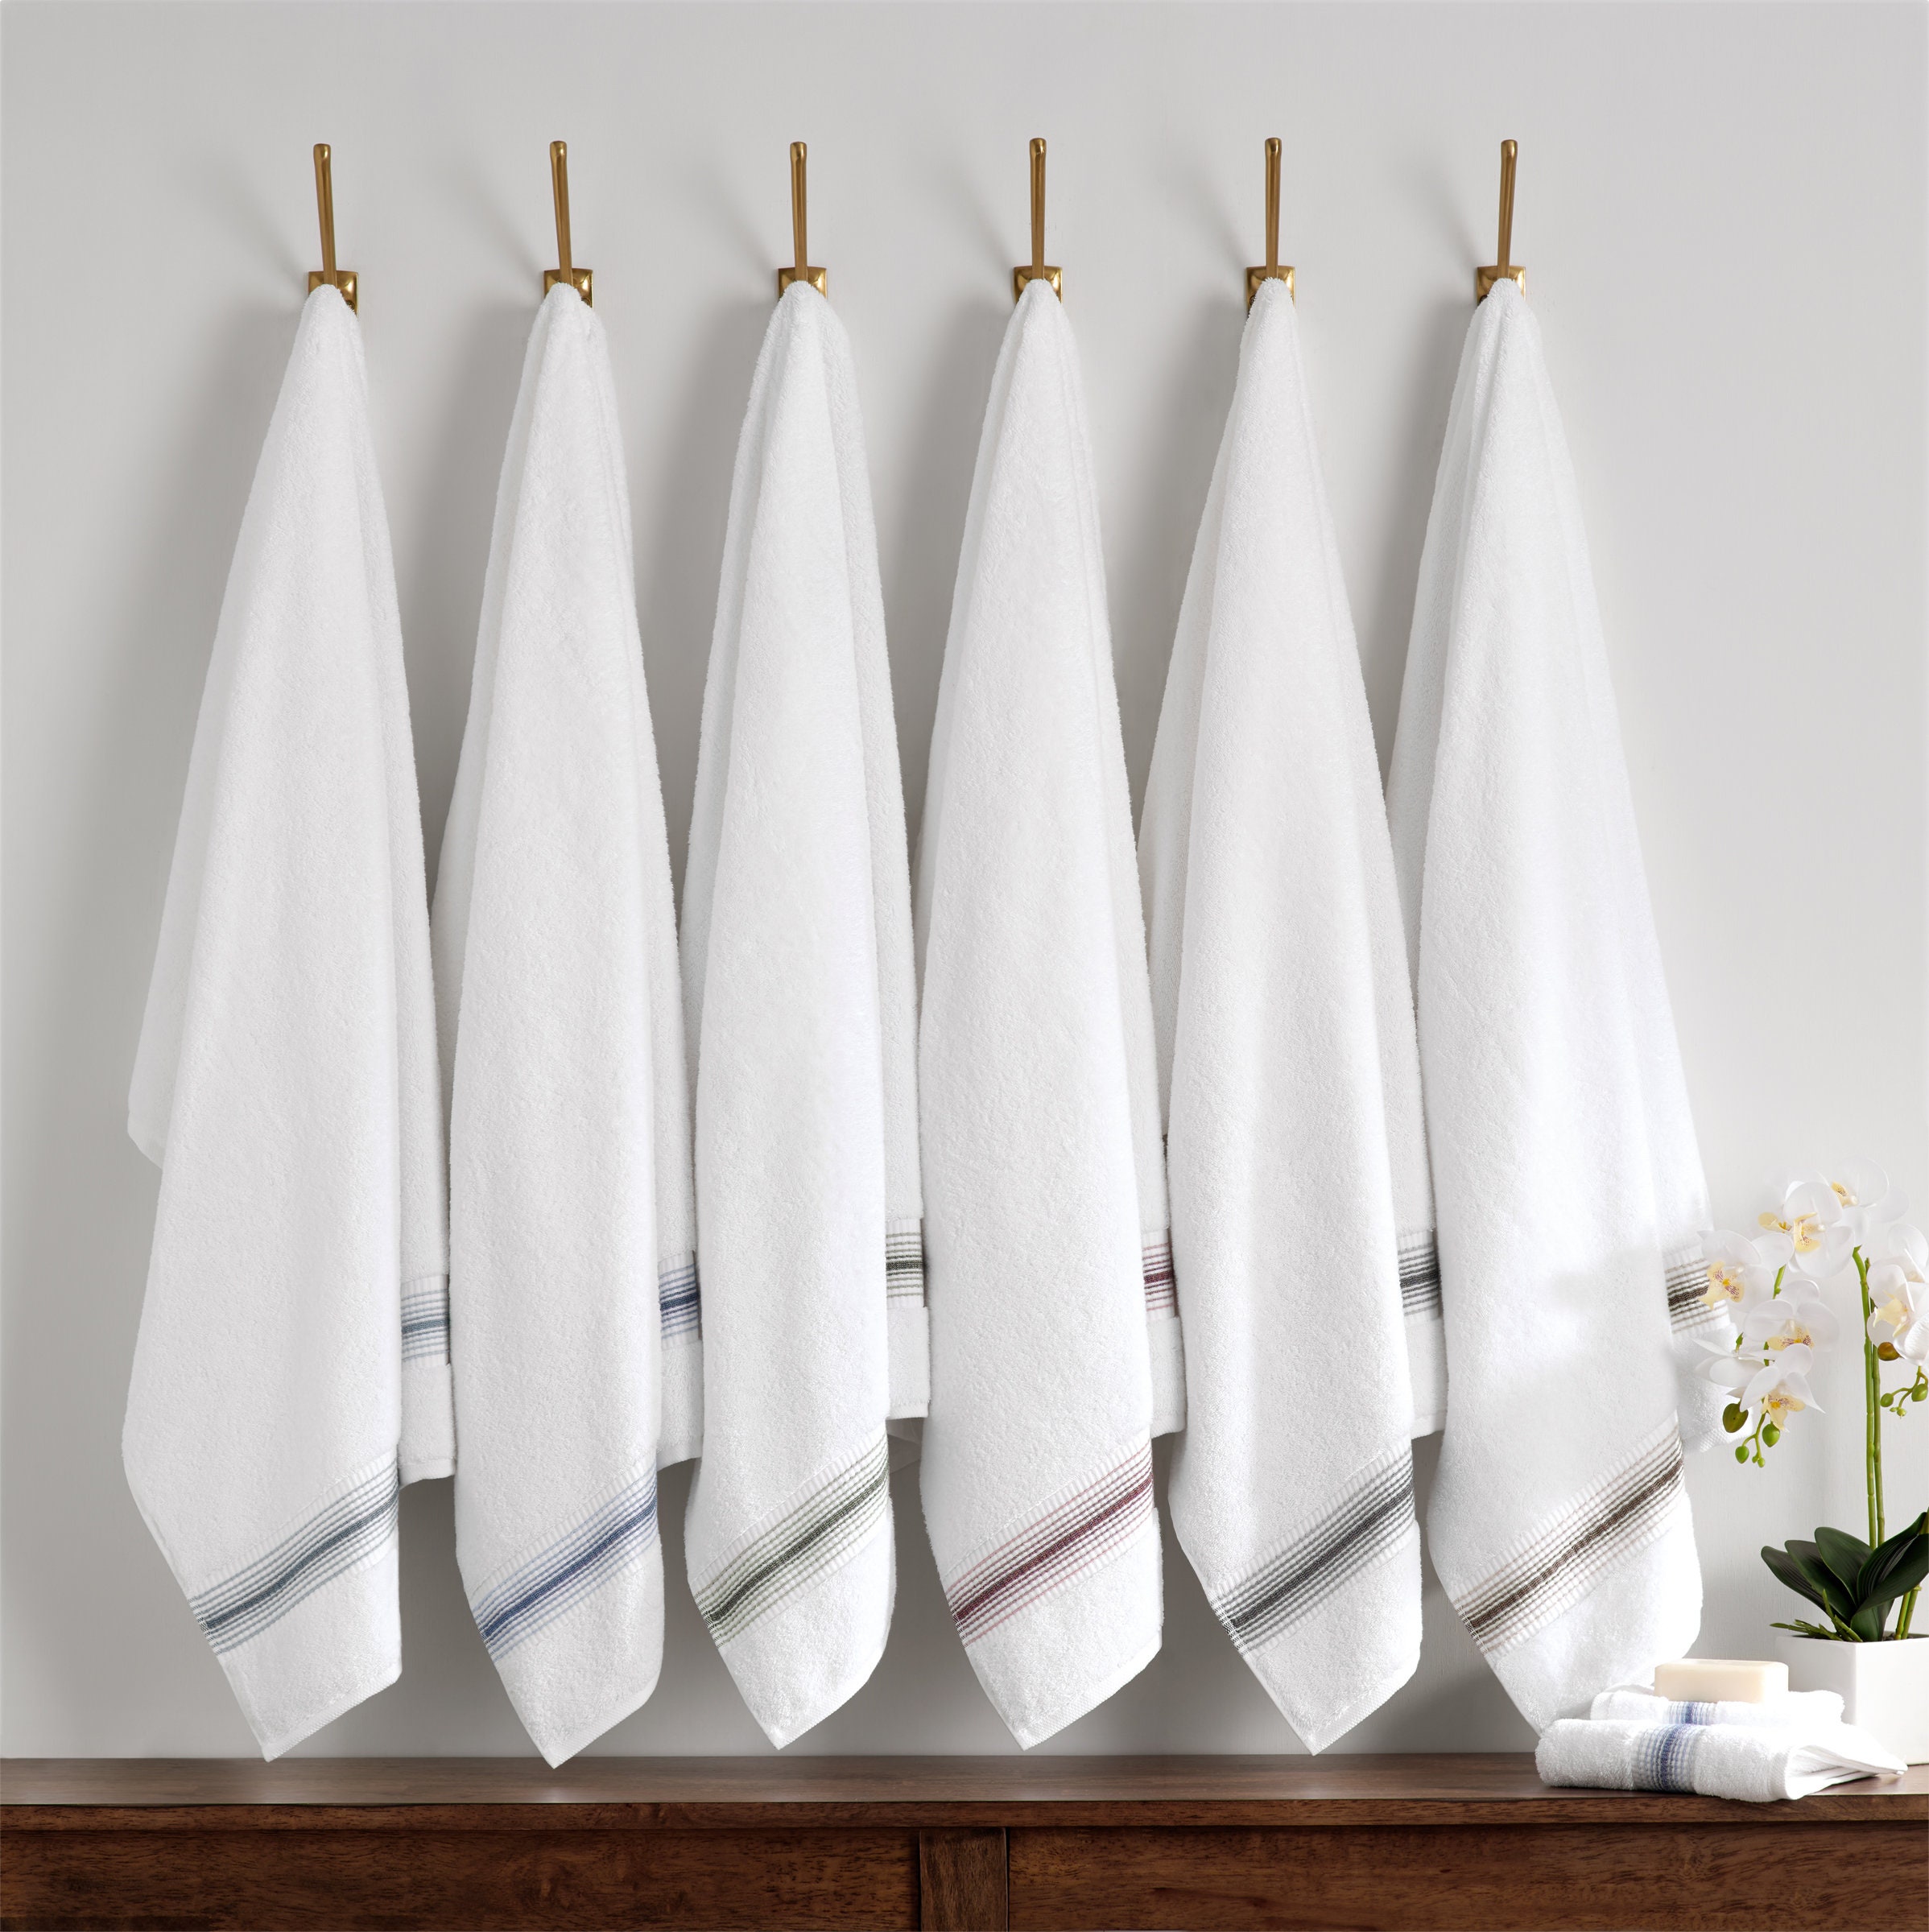 8 Piece Oversized White Bath Towel Set-2 Extra Large Bath Towel Sheets,2  Hand Towels,4 Washcloths-600GSM Soft Highly Absorbent Quick Dry Beach Chair